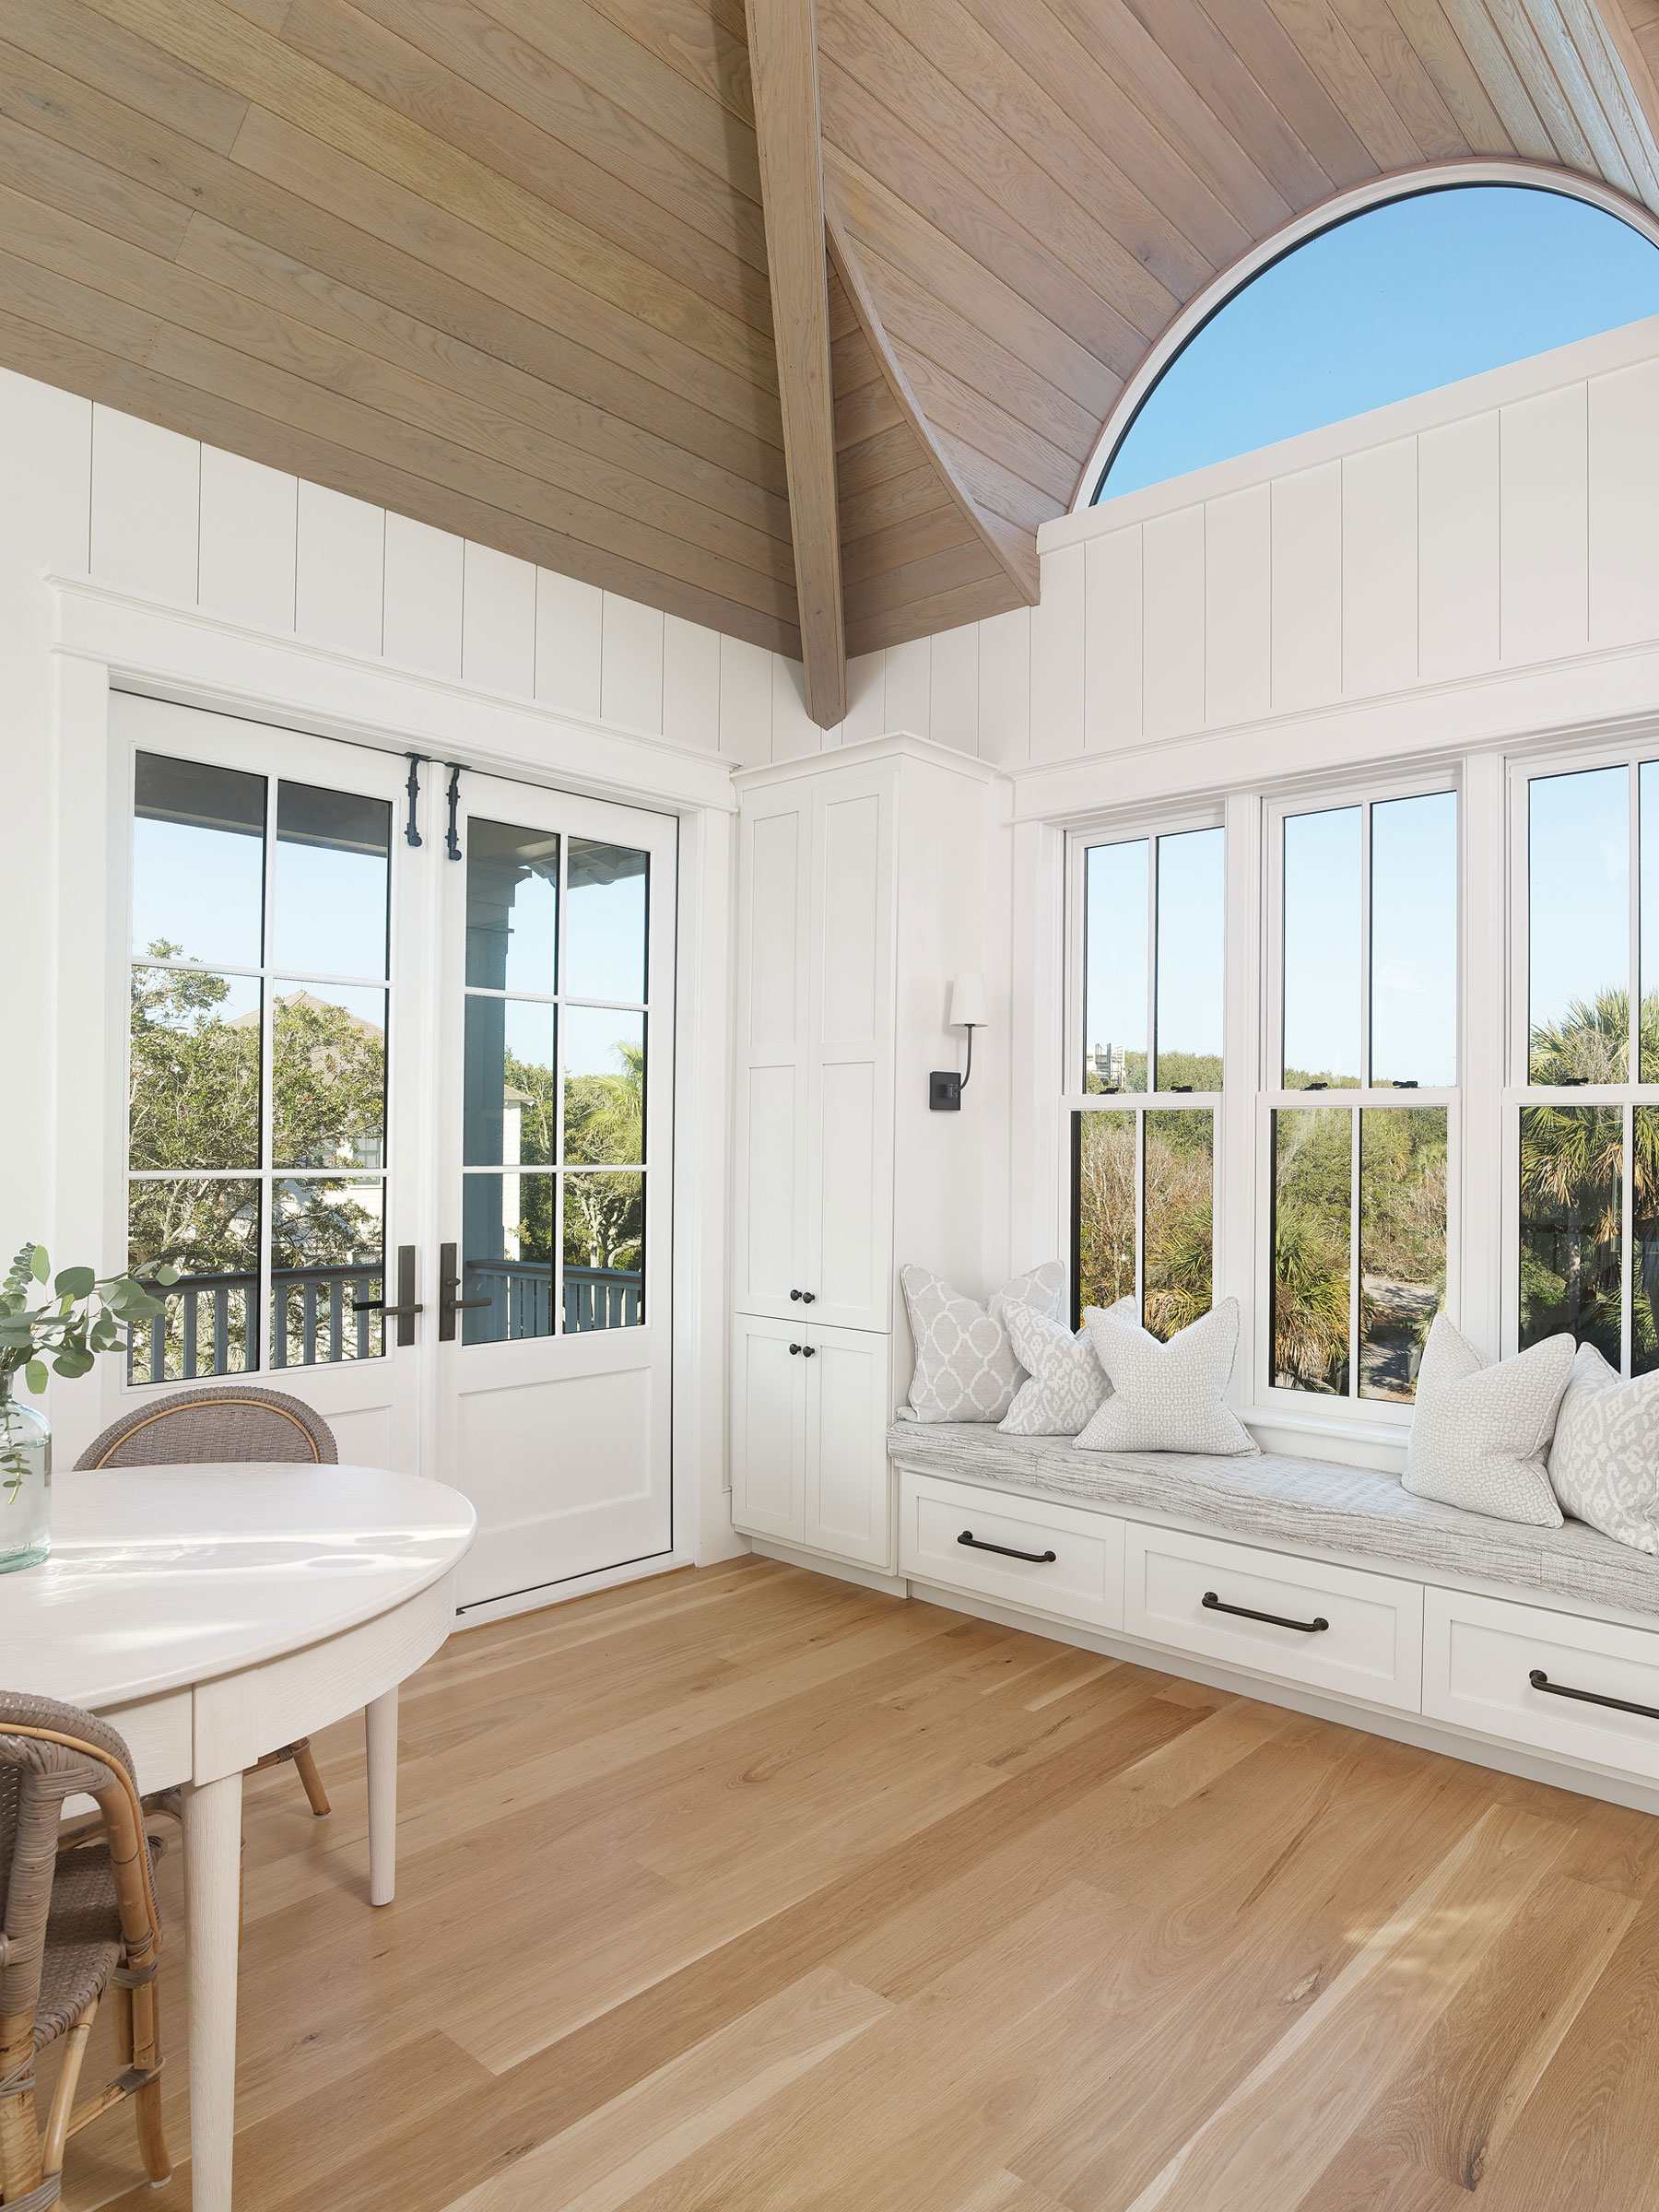 Window seat at the top of stairs in reverse plan beach house with barrel vault eyebrow window